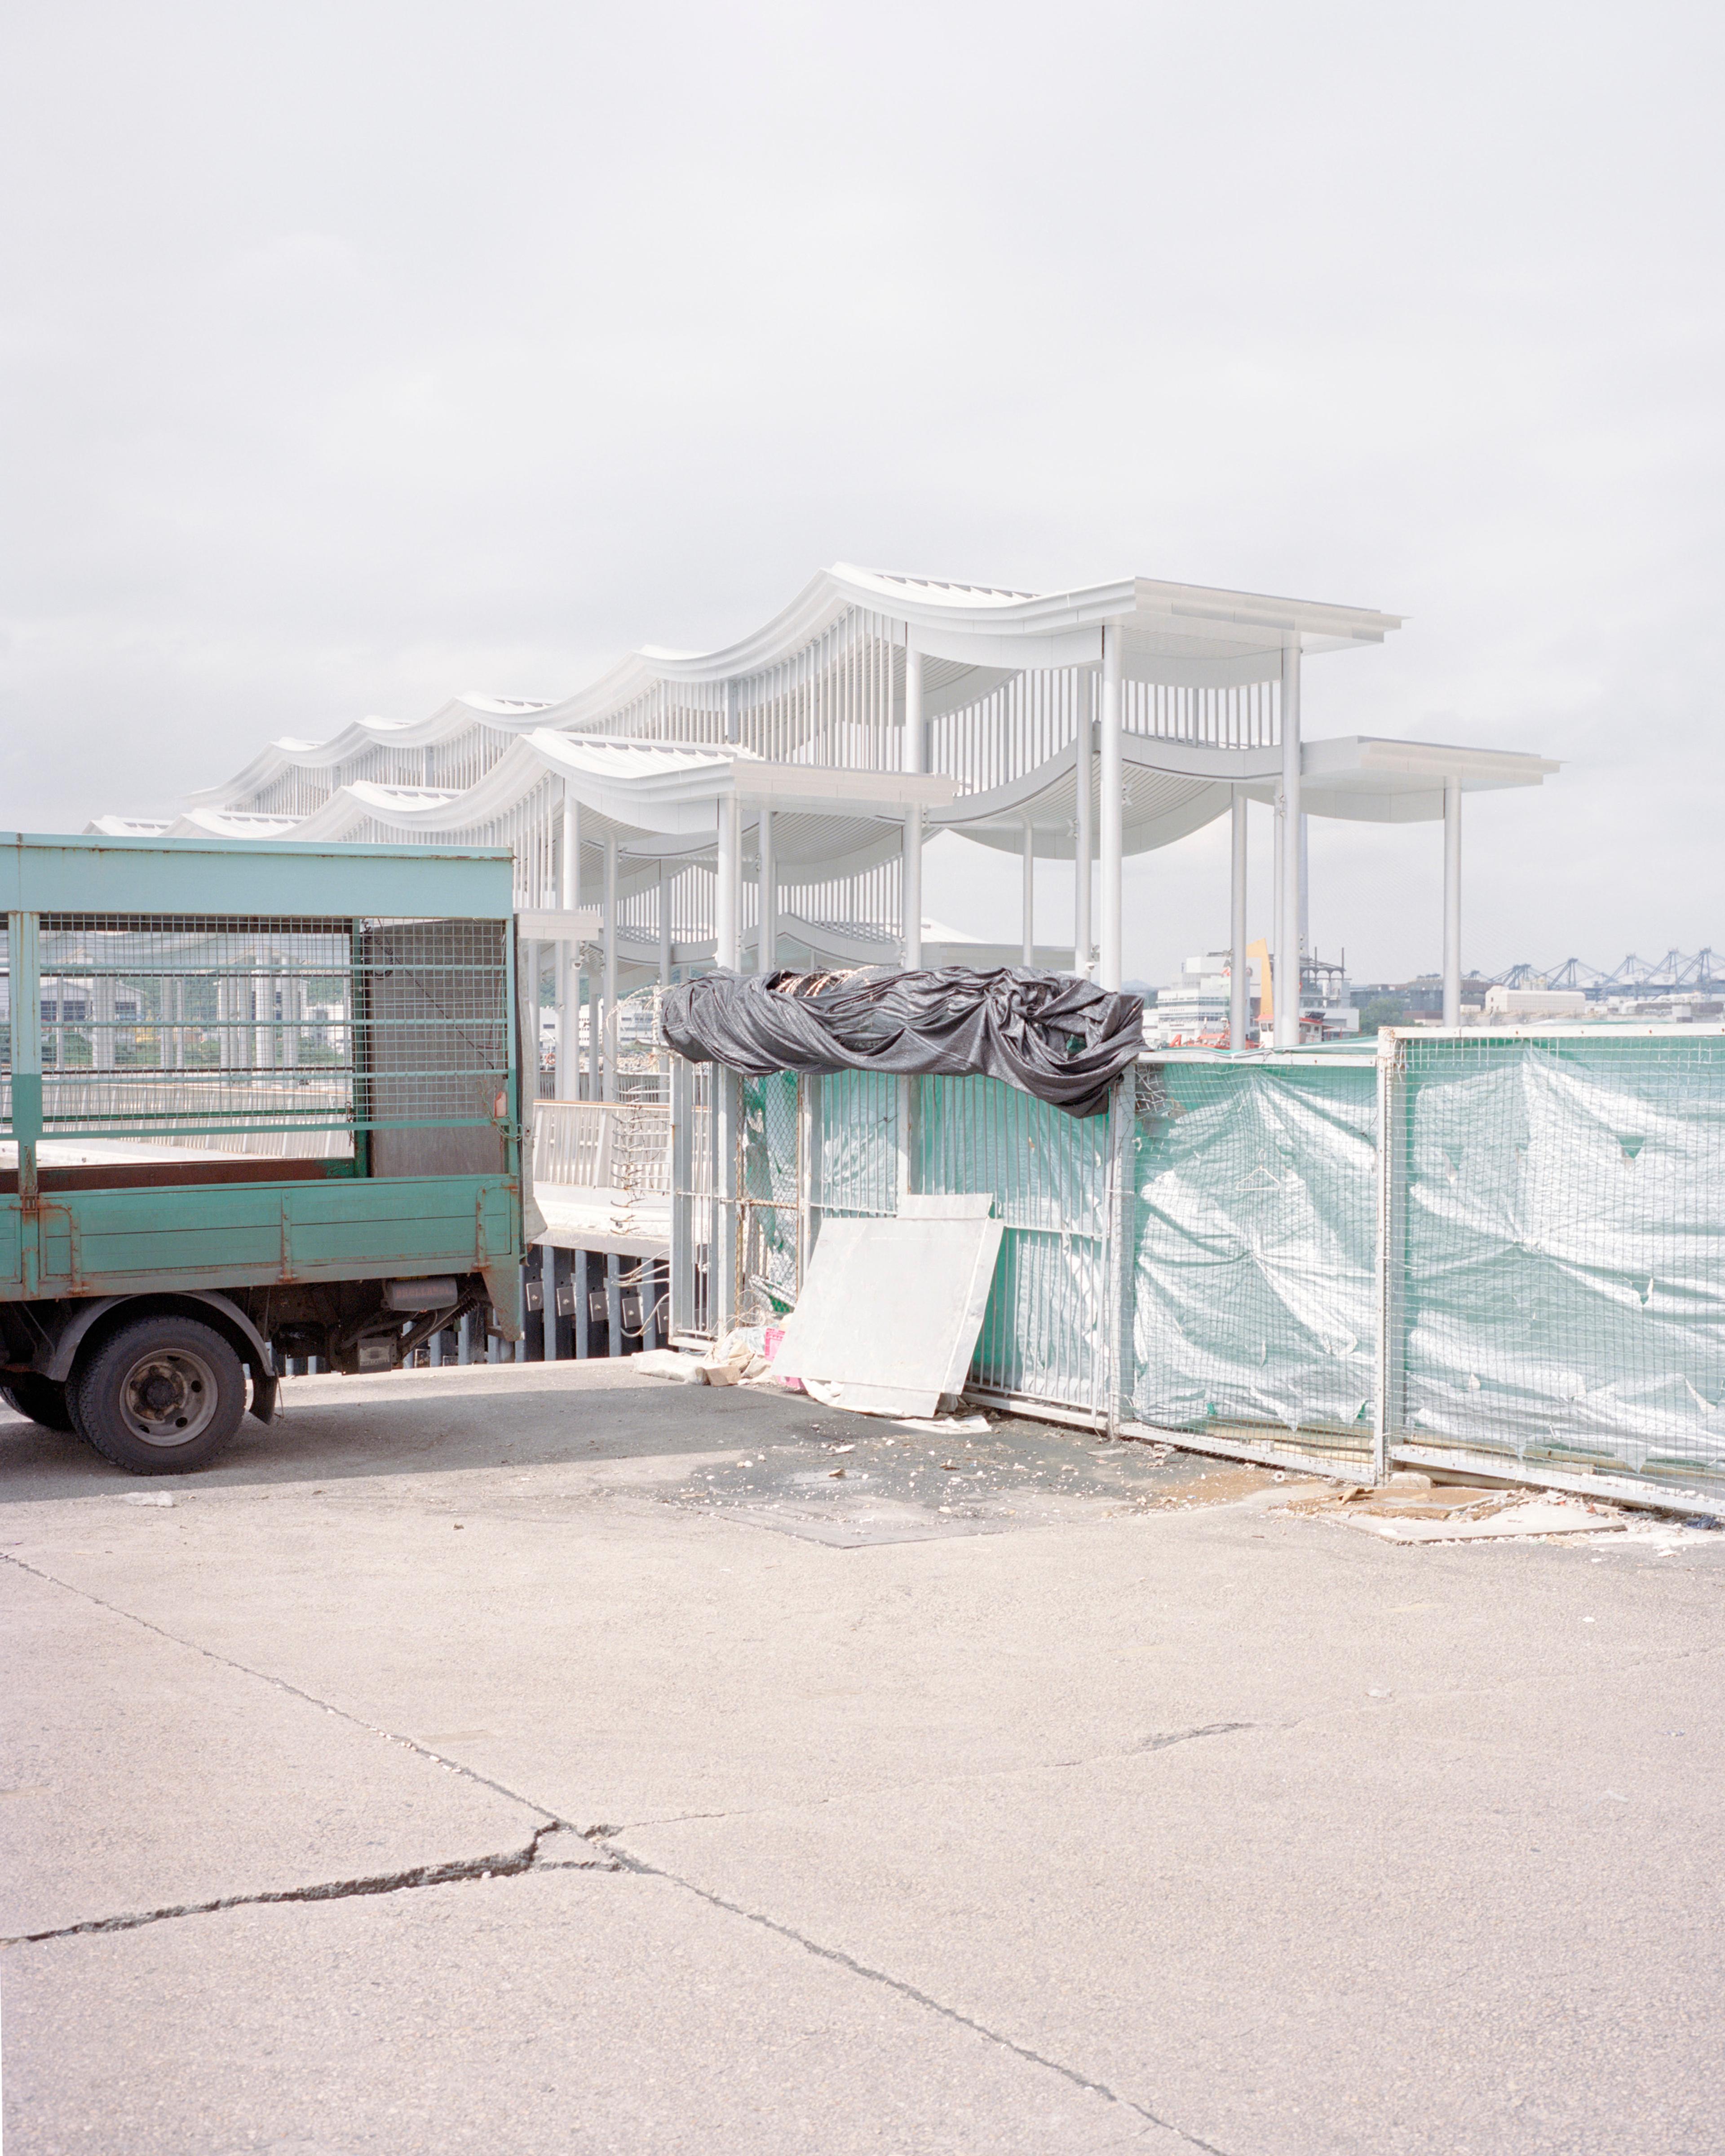 Silver pier canopy with truck and tarp in foreground